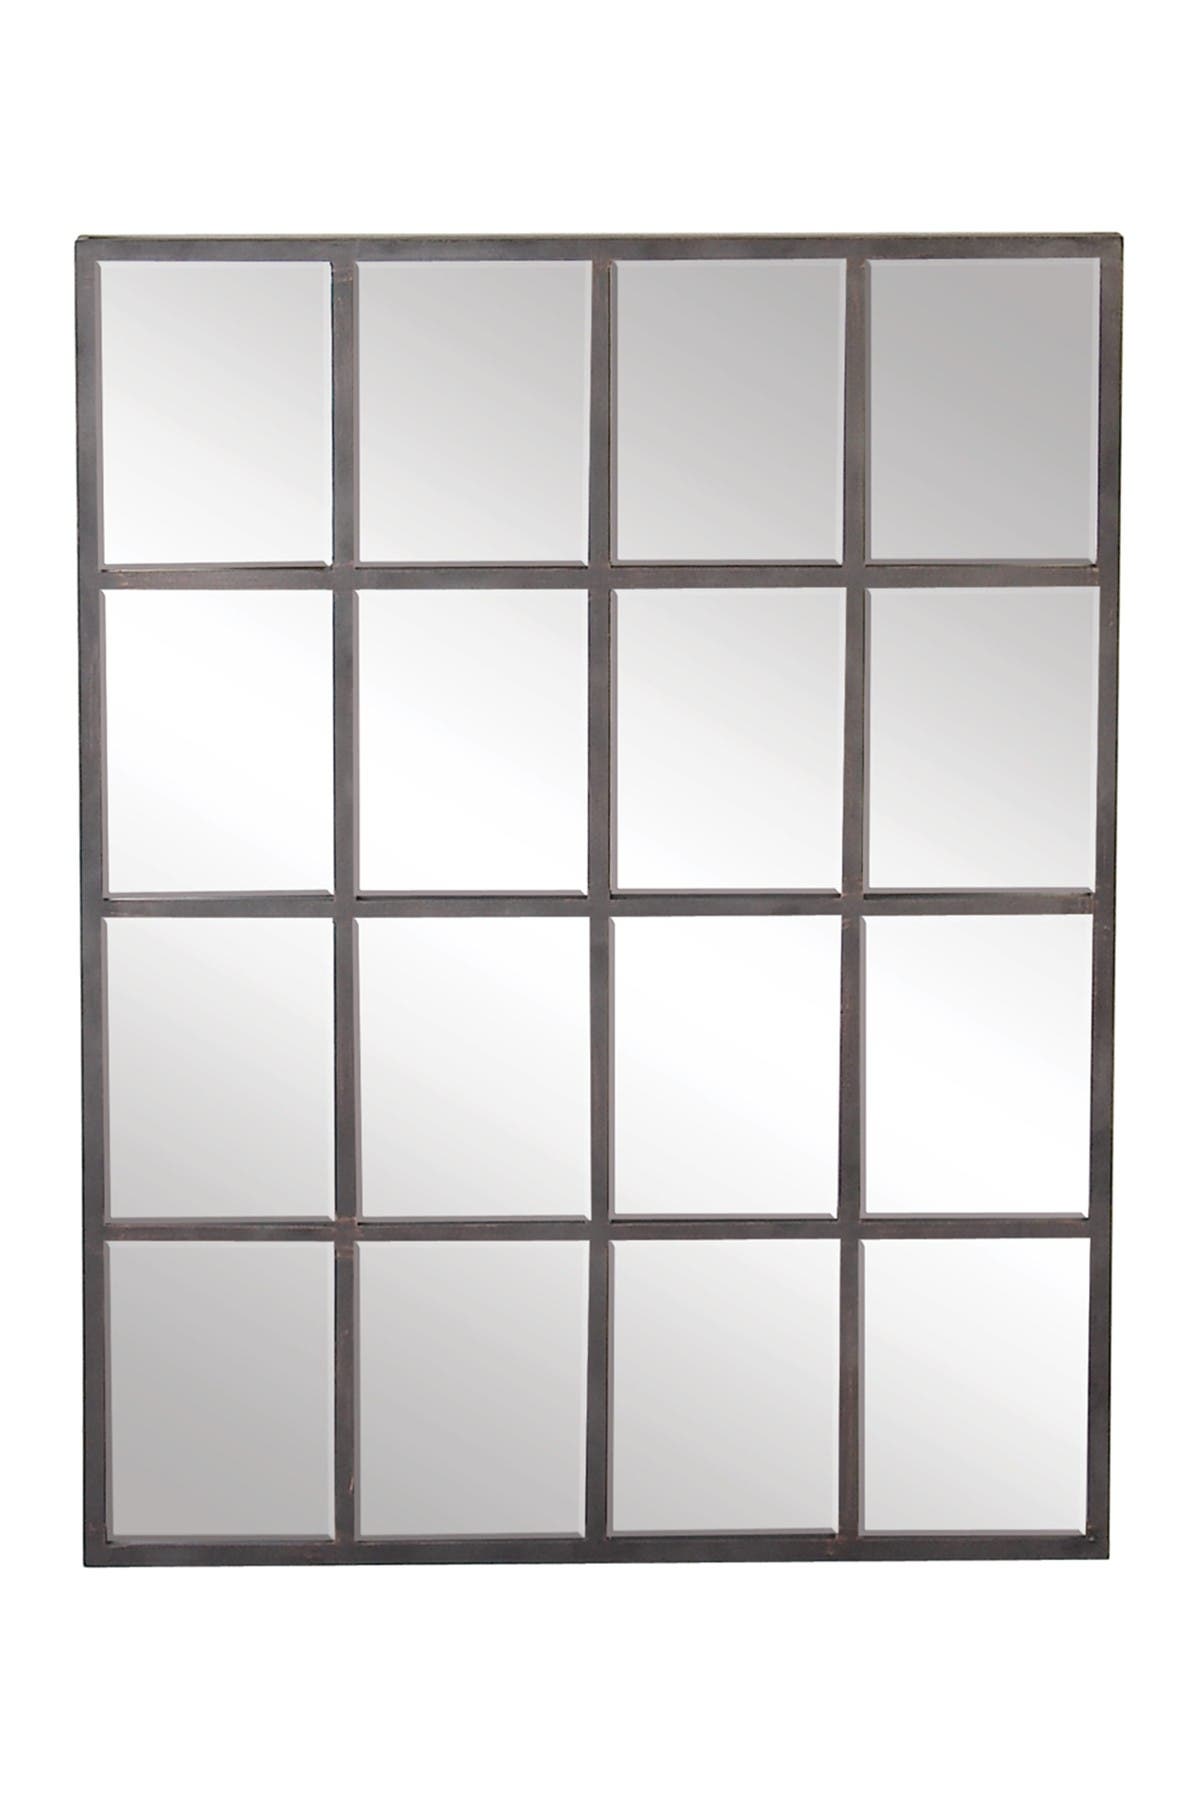 Willow Row Clear Modern Wood Paneled Wall Mirror